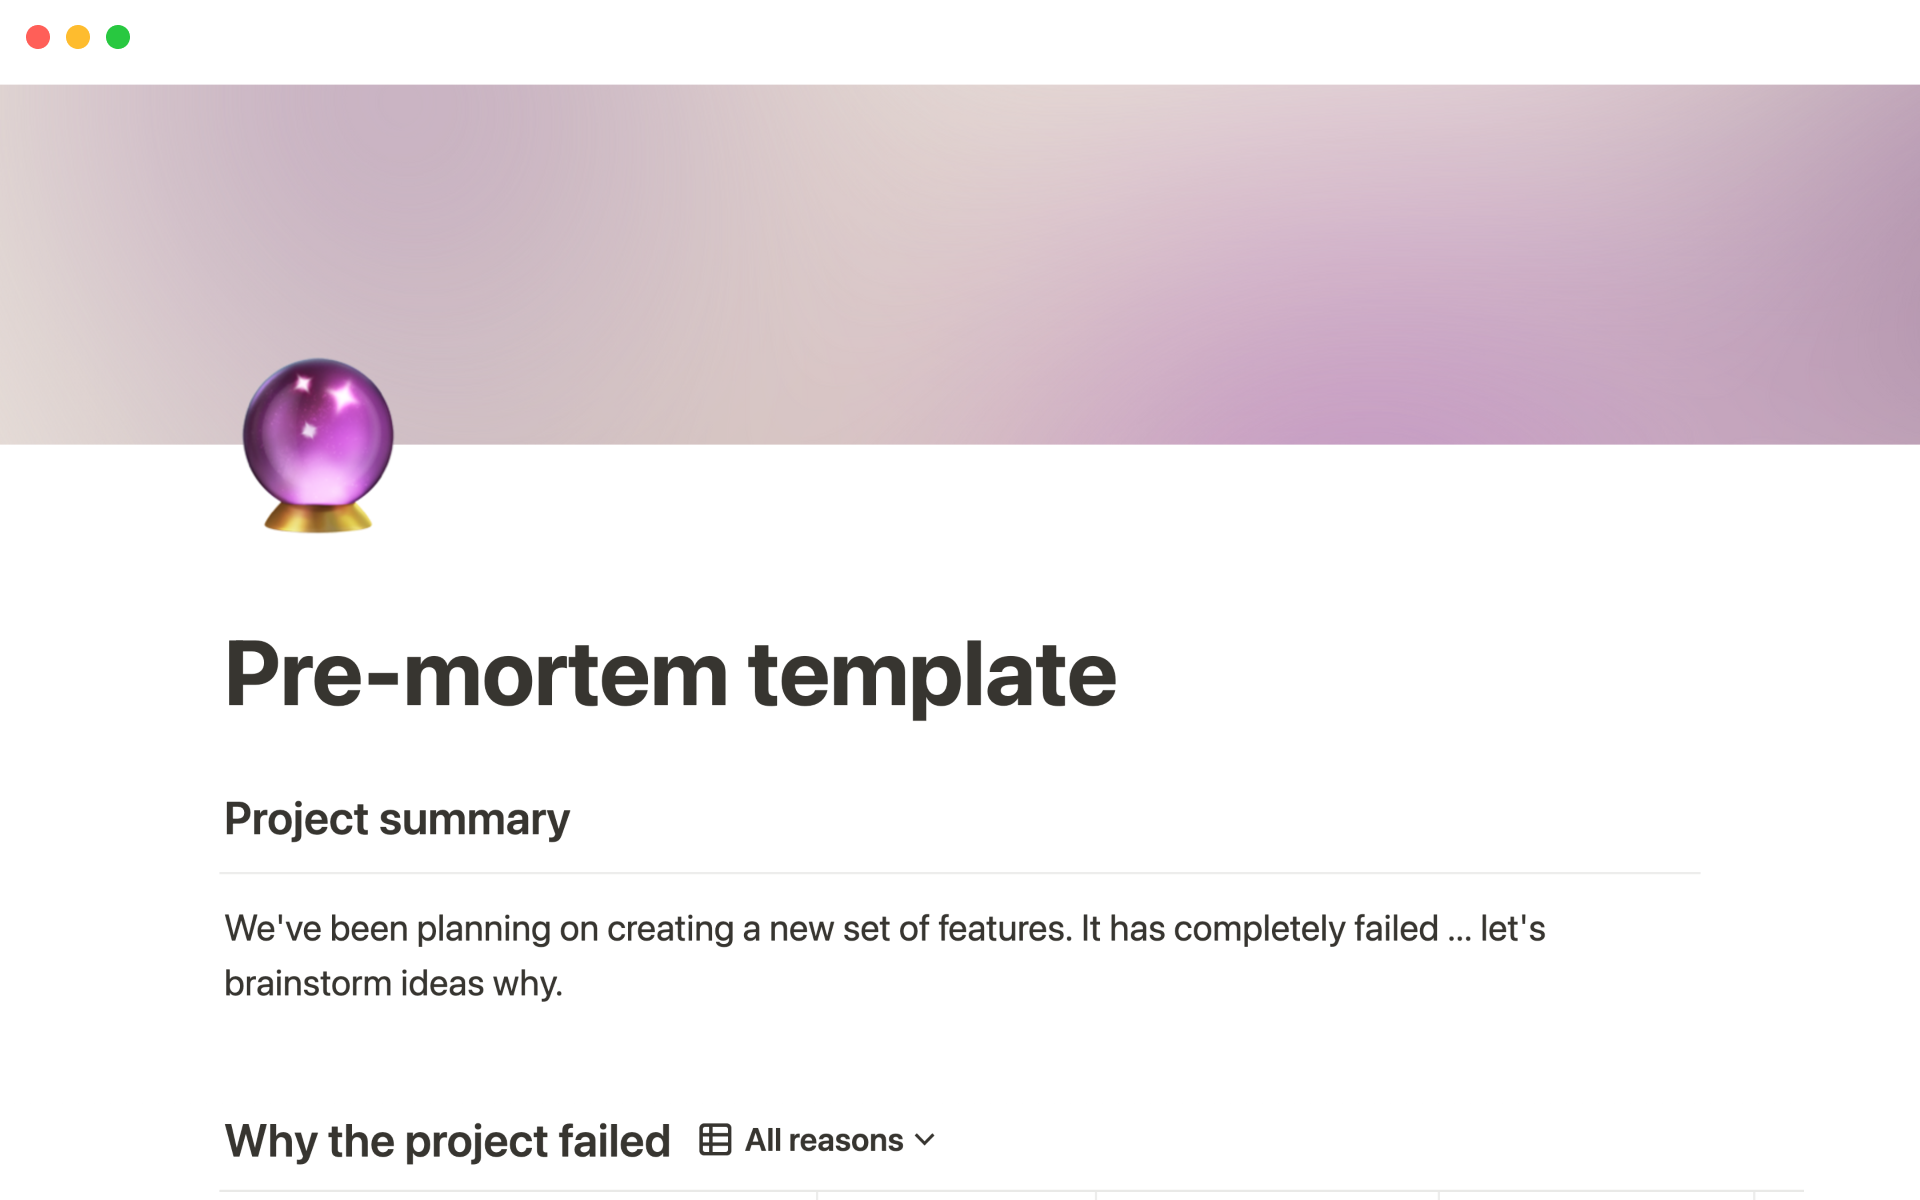 Screenshot of Best Post-mortem Templates for Electrical Engineers collection by Notion